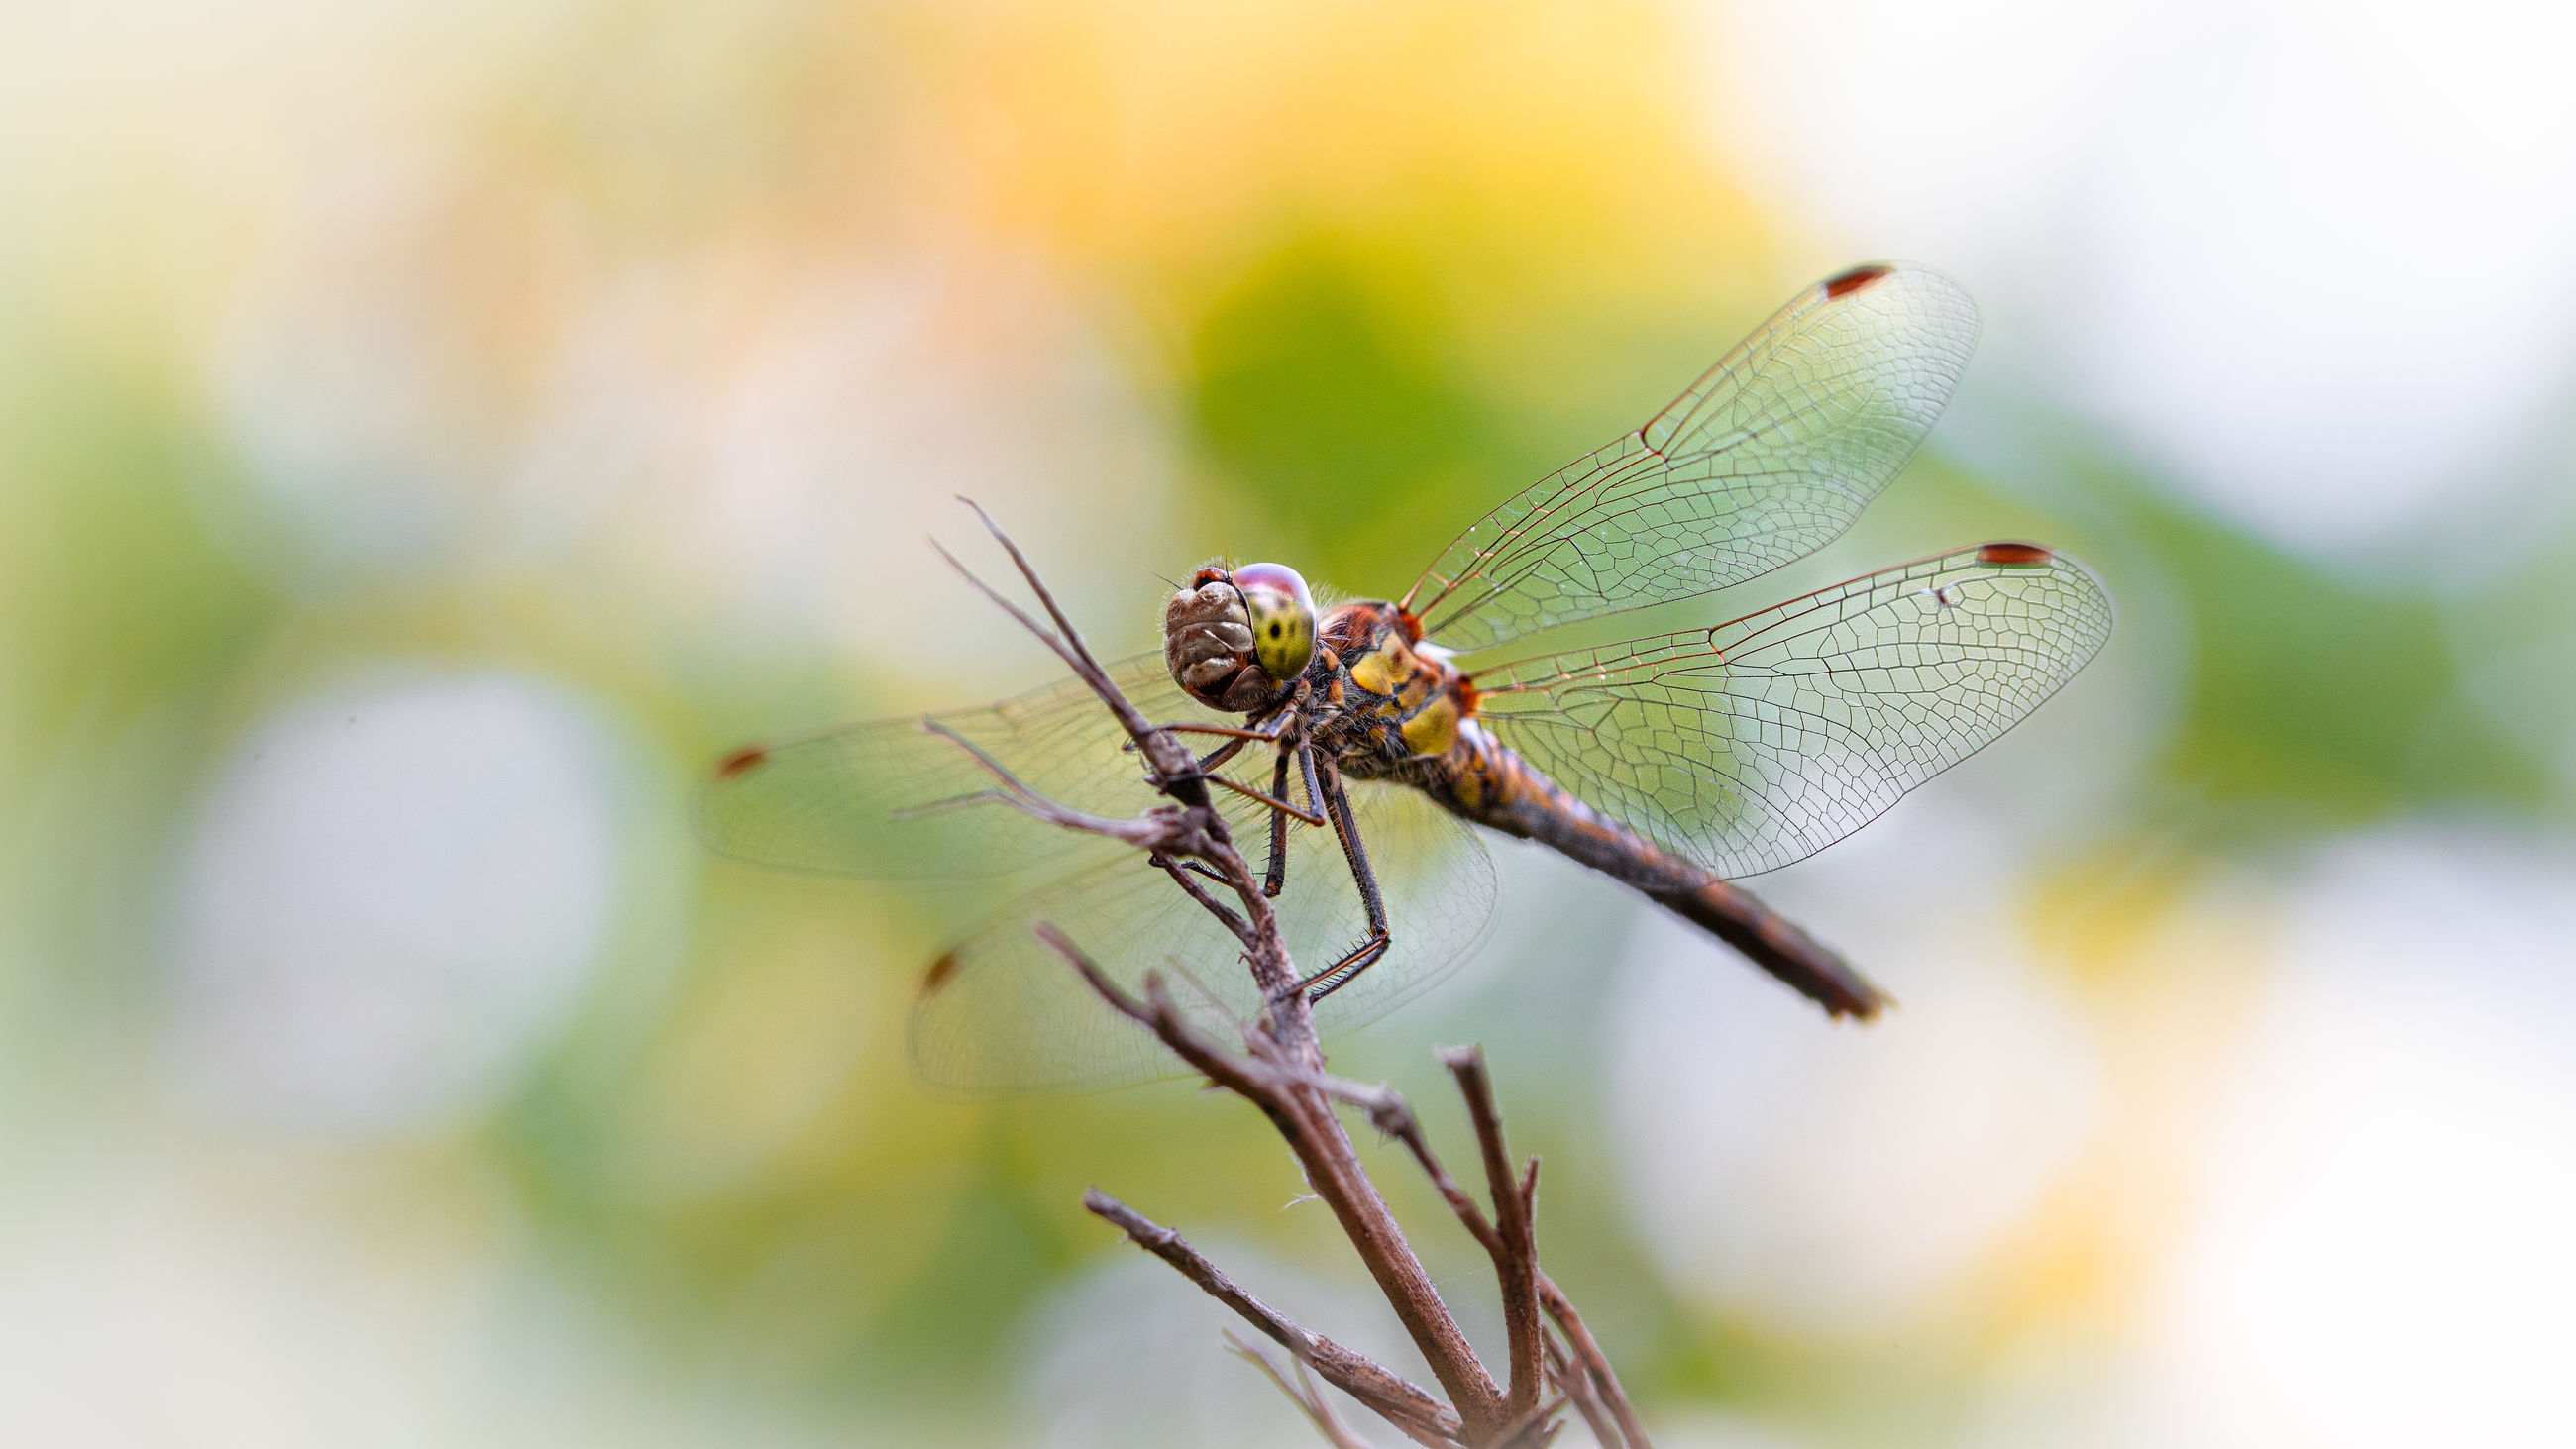 insect, invertebrate, close-up, animal wildlife, animals in the wild, animal, animal themes, focus on foreground, plant, animal wing, selective focus, one animal, nature, day, no people, outdoors, zoology, green color, beauty in nature, growth